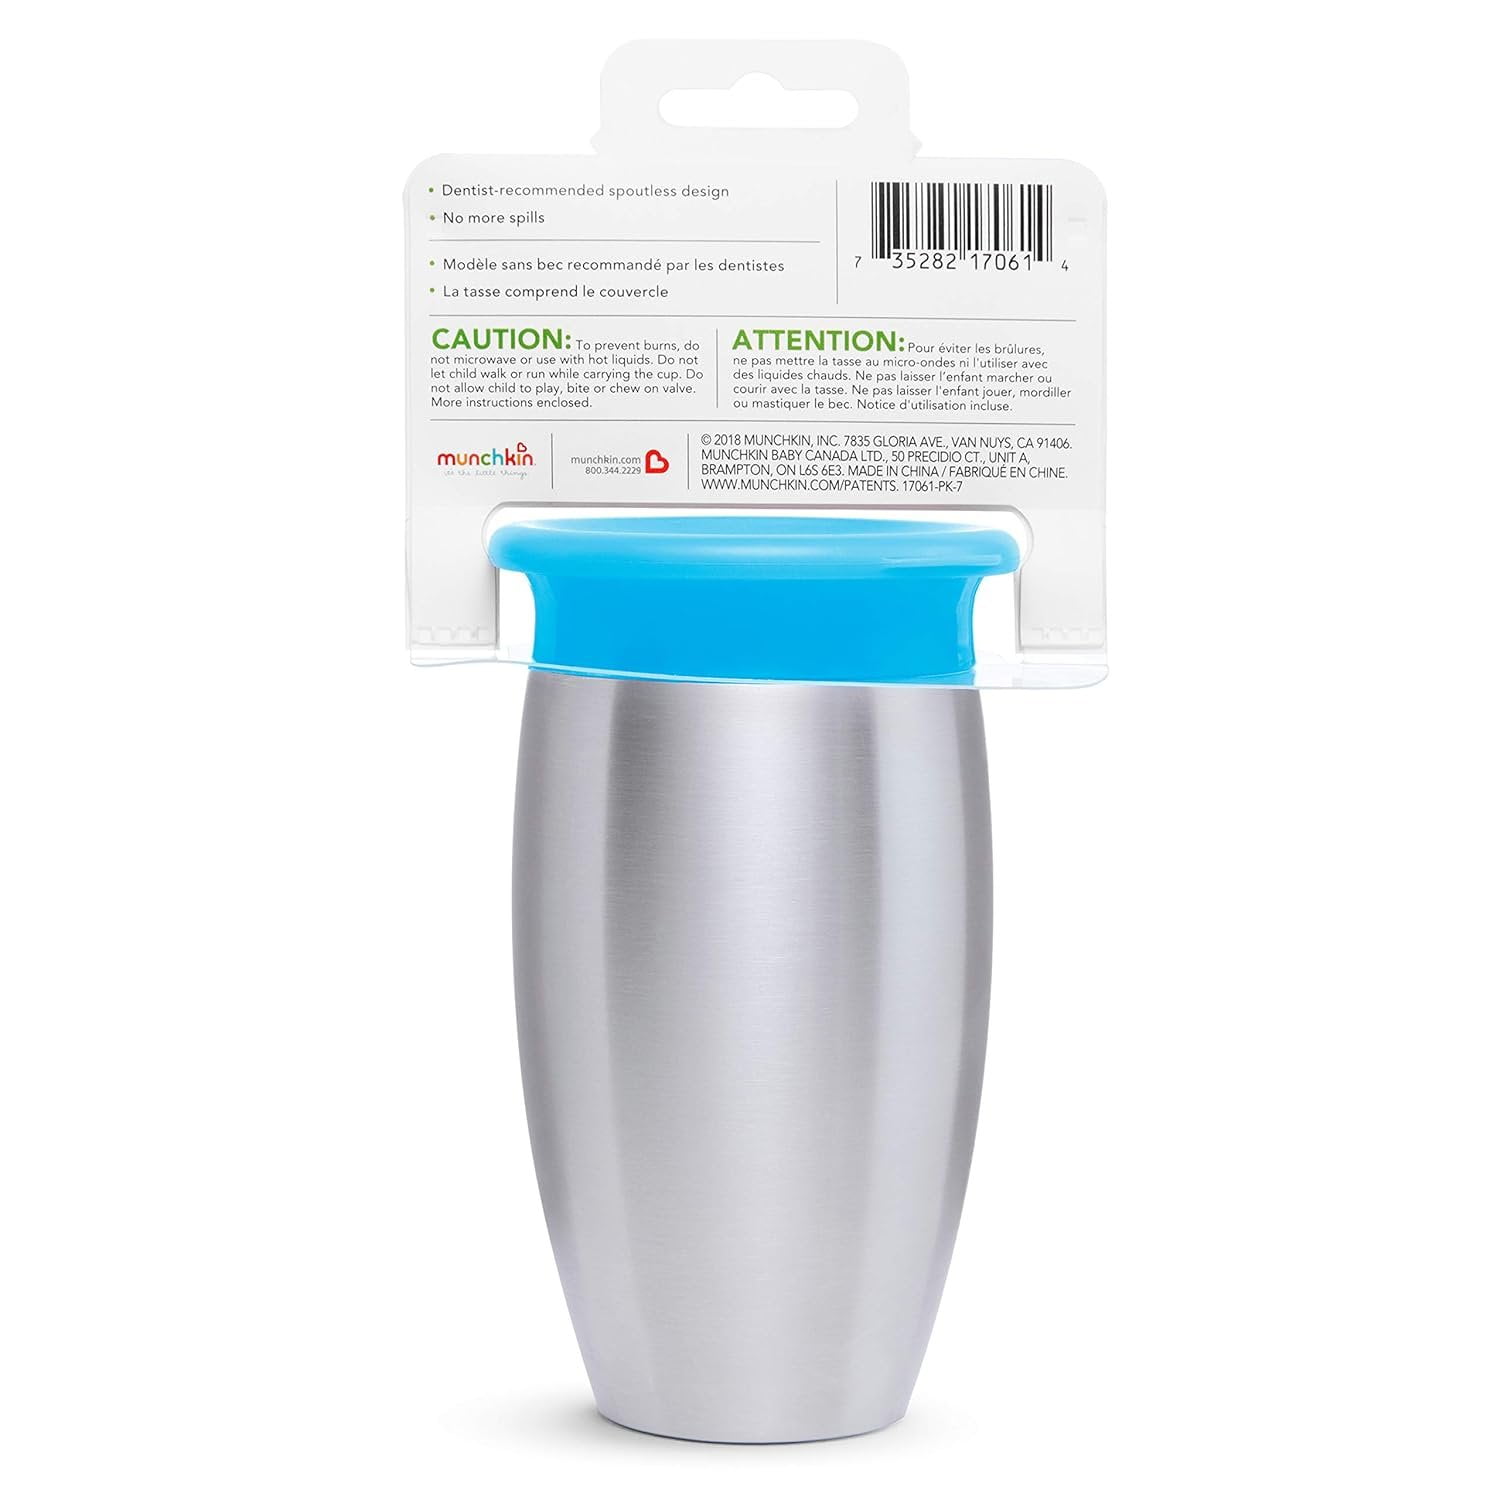 Top 3 Stainless Steel Sippy Cups by Munchkin 360, Contigo, Thermos